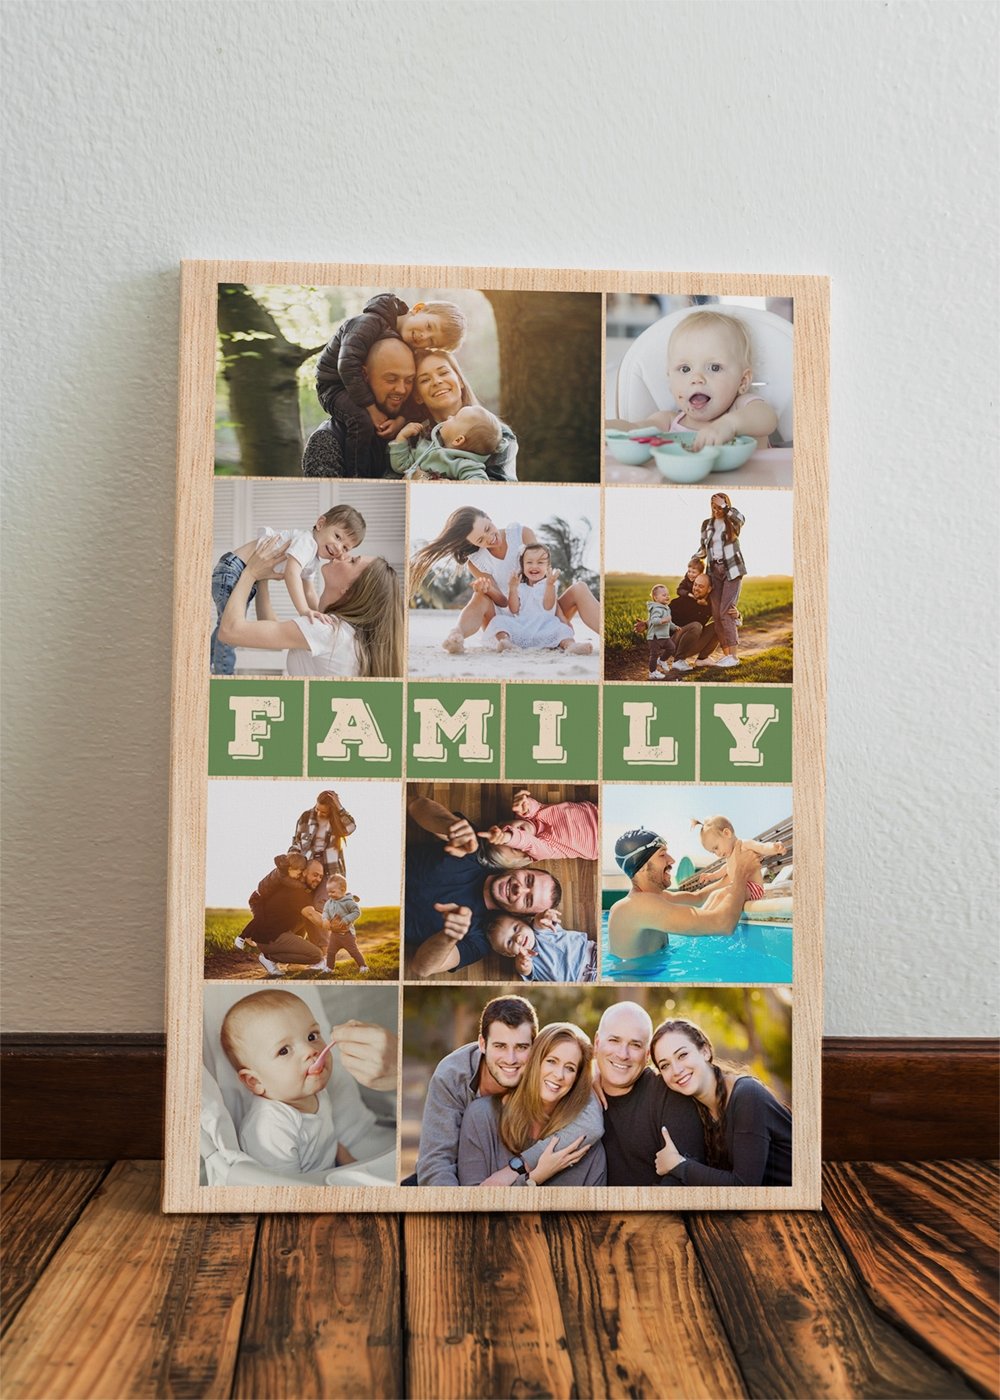 https://cdn.shopify.com/s/files/1/0285/9358/6228/products/family-custom-photo-collage-portrait-canvas-personalized-light-wood-background-393817_3000x3000.jpg?v=1623199539